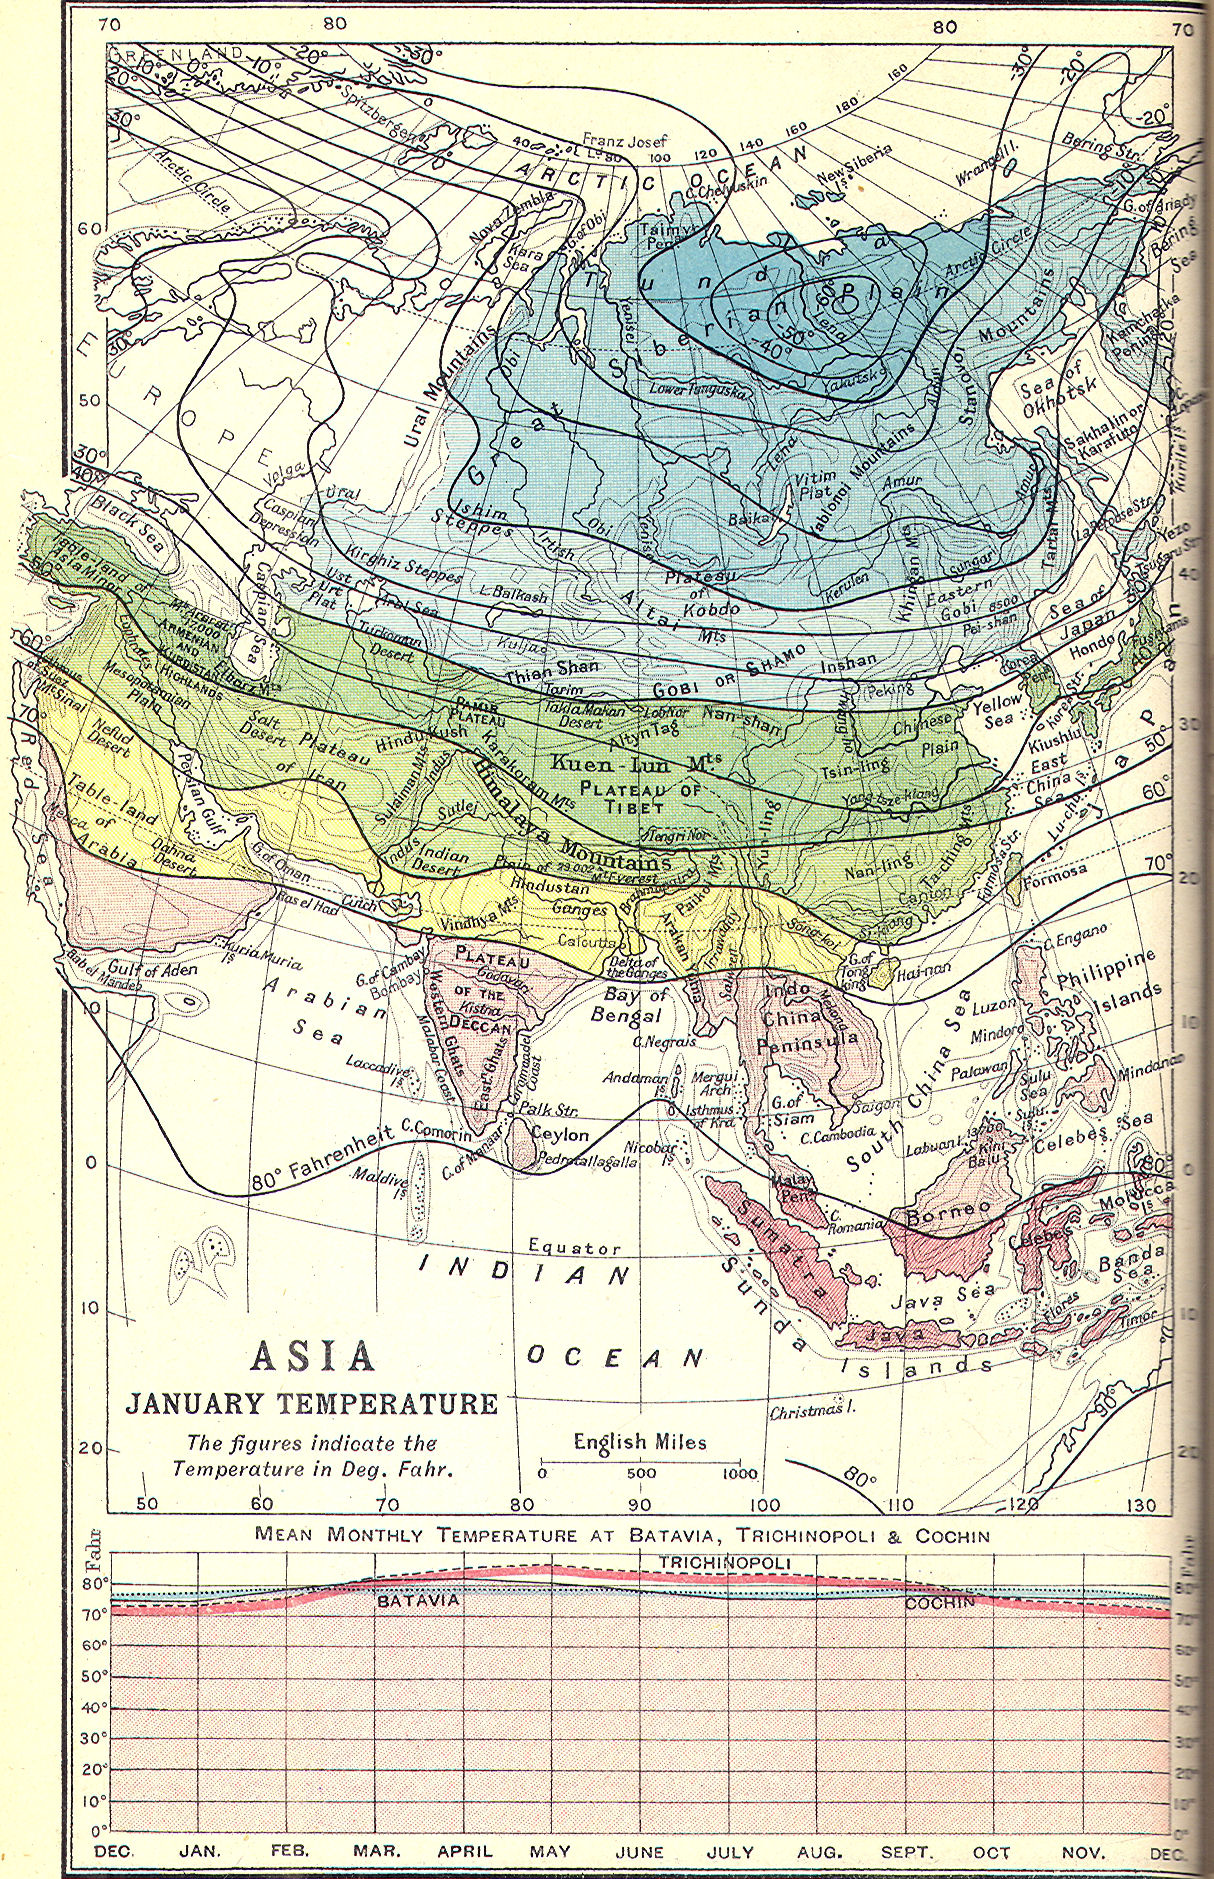 http://www.heritage-history.com/maps/lhasia/asia030.jpg